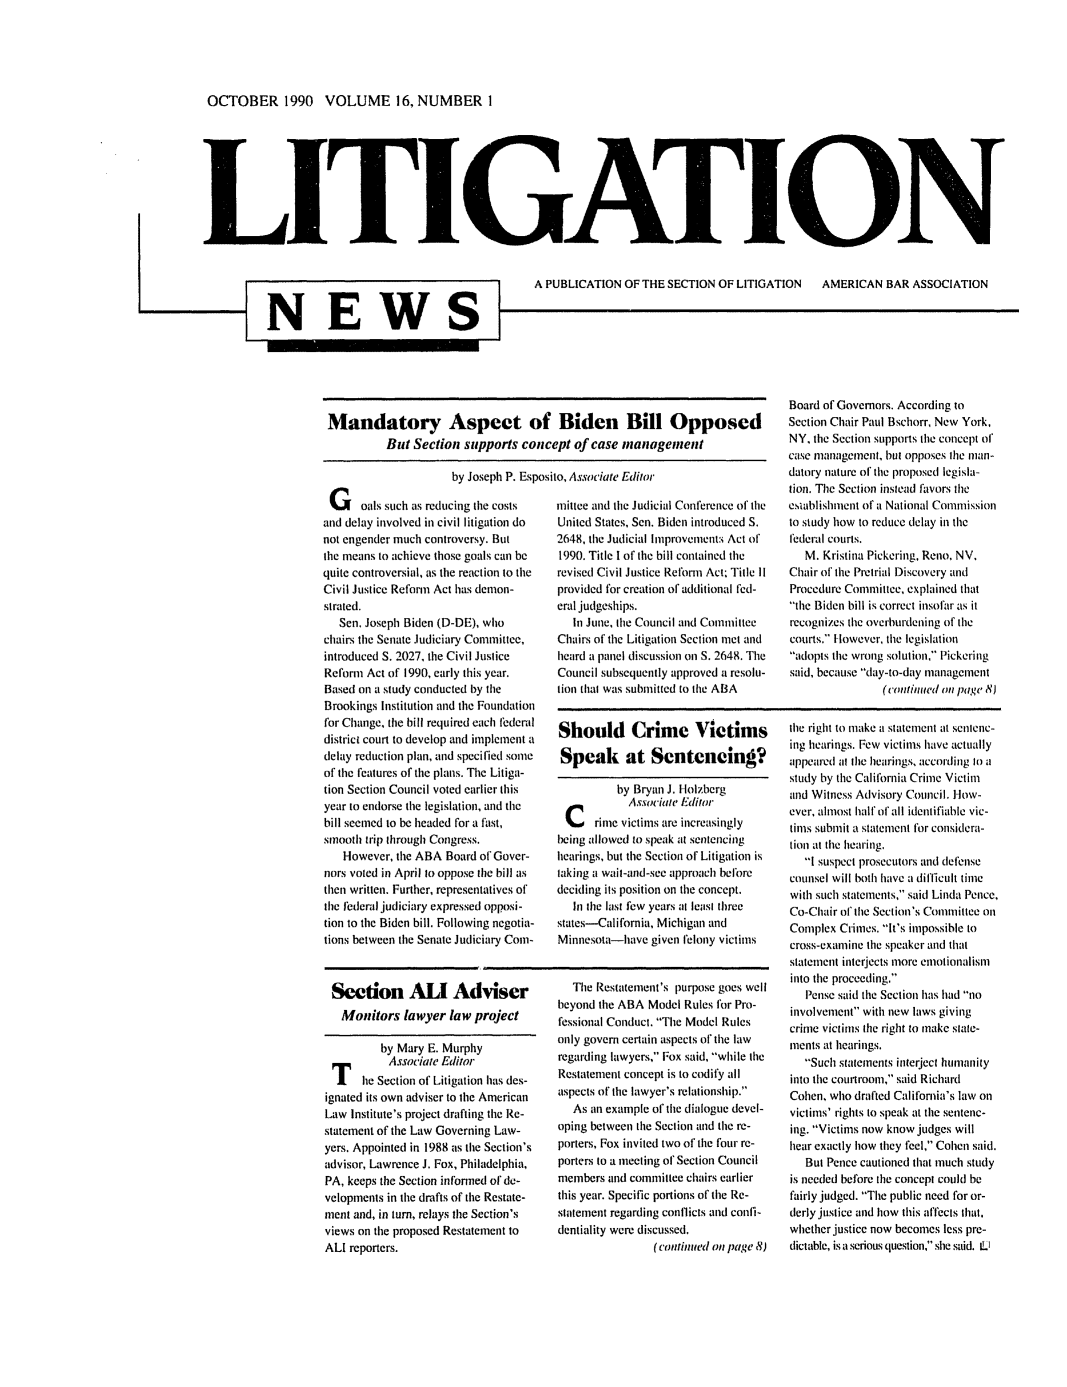 handle is hein.journals/lignws16 and id is 1 raw text is: OCTOBER 1990 VOLUME 16, NUMBER IITI ATI NA PUBLICATION OF THE SECTION OF LITIGATION  AMERICAN BAR ASSOCIATIONMandatory Aspect of Biden Bill OpposedBut Section supports concept of case managementby Joseph P. Esposito, Associate EditorG oals such as reducing the costsand delay involved in civil litigation donot engender much controversy. Butthe means to achieve those goals can bequite controversial, as the reaction to theCivil Justice Reform Act has demon-strated.Sen. Joseph Biden (D-DE), whochairs the Senate Judiciary Committee,introduced S. 2027, the Civil JusticeReform Act of 1990, early this year.Based on a study conducted by tileBrookings Institution and the Foundationfor Change, the bill required each federaldistrict court to develop and implement adelay reduction plan, and specified someof the features of the plans. The Litiga-tion Section Council voted earlier thisyear to endorse the legislation, and thebill seemed to be headed for a fast,smooth trip through Congress.However, the ABA Board of Gover-nors voted in April to oppose the bill asthen written. Further, representatives ofthe Federal judiciary expressed opposi-tion to the Biden bill. Following negotia-tions between the Senate Judiciary Coin-Section Al AdviserMonitors lawyer law projectby Mary E. MurphyAssociate Editorhe Section of Litigation has des-ignated its own adviser to the AmericanLaw Institute's project drafting the Re-statement of the Law Governing Law-yers. Appointed in 1988 as the Section'sadvisor, Lawrence J. Fox, Philadelphia,PA, keeps the Section informed of de-velopments in tile drafts of the Restate-ment and, in turn, relays the Section'sviews on the proposed Restatement toALl reporters.mittee and tile Judicial Conference of theUnited States, Sen. Biden introduced S.2648, the Judicial lprovements Act of1990. Title I of the bill contained therevised Civil Justice Refonll Act; Title IIprovided for creation of additional fed-eral judgeships.hi June, tile Council and CommitteeChairs of the Litigation Section met andheard a panel discussion oil S. 2648. TheCouncil subsequently approved a resolu-tion that was submitted to the ABAShould Crime VictimsSpeak at Scntencing?by Bryan J. 1olzbergAssociale Editorrimie victims are increasinglybeing allowed to speak at sentencinghearings, but the Section of Litigation istaking a wait-and-see approach befbredeciding its position on the concept.hi the last few years at least threestates-California, Michigan andMinnesota-have given felony victimsTile Restatement's purpose goes wellbeyond the ABA Model Rules for Pro-fessional Conduct. Tile Model Rulesonly govern certain aspects of the lawregarding lawyers, Fox said, while theRestatement concept is to codify allaspects of the lawyer's relationship.As an example of the dialogue devel-oping between the Section and the re-porters, Fox invited two of the ('our re-porters to a meeting of Section Councilmembers and committee chairs earlierthis year. Specific portions of the Re-statement regarding conflicts and confi-dentiality were discussed.(continued oil page 8)Board of Governors. According toSection Chair Paul Bschorr, New York,NY, the Section supports tile concept ofcase management, but opposes the man-datory nature of the proposed legisla-lion. The Section instead favors theesiablishnient of a National Commissionto study how to reduce delay in thefederal courts.M. Kristina Pickering, Reno, NV,Chair of lhe Pretrial Discovery andProcedure Committee, explained thatthe Biden bill is correct insofar as itrecognizes the overburdening of thecourts. However, the legislationadopts the wrong solution, Pickeringsaid, because day-to-day management(continlled on page 8Jtile right to make a statement at sentenc-ing hearings. Few victims have actuallyappeared al the hearings, according to astudy by the California Crime Victimand Witness Advisory Council. How-ever, almost half of all identifiable vic-timis submit a statement for considera-tion at the hearing. suspect prosecutors and defensecounsel will both have a difficult timewith such statements, said Linda Pence,Co-Chair of the Section's Committee onComplex Crimes. It's impossible tocross-examine the speaker and thatstatement interjects more emotionalisminto the proceeding.Pense said the Section has had noinvolvement with new laws givingcrime victims the right to make state-ments at hearings.Such statements interject humanityinto the courtroom, said RichardCohen, who drafted California's law onvictims' rights to speak at the sentenc-ing. Victims now know judges willhear exactly how they feel, Cohen said.But Pence cautioned that much studyis needed before the concept could befairly judged. The public need for or-derly justice and how this affects that,whether justice now becomes less pre-dictable, is a serious question, she said. tLN E WS